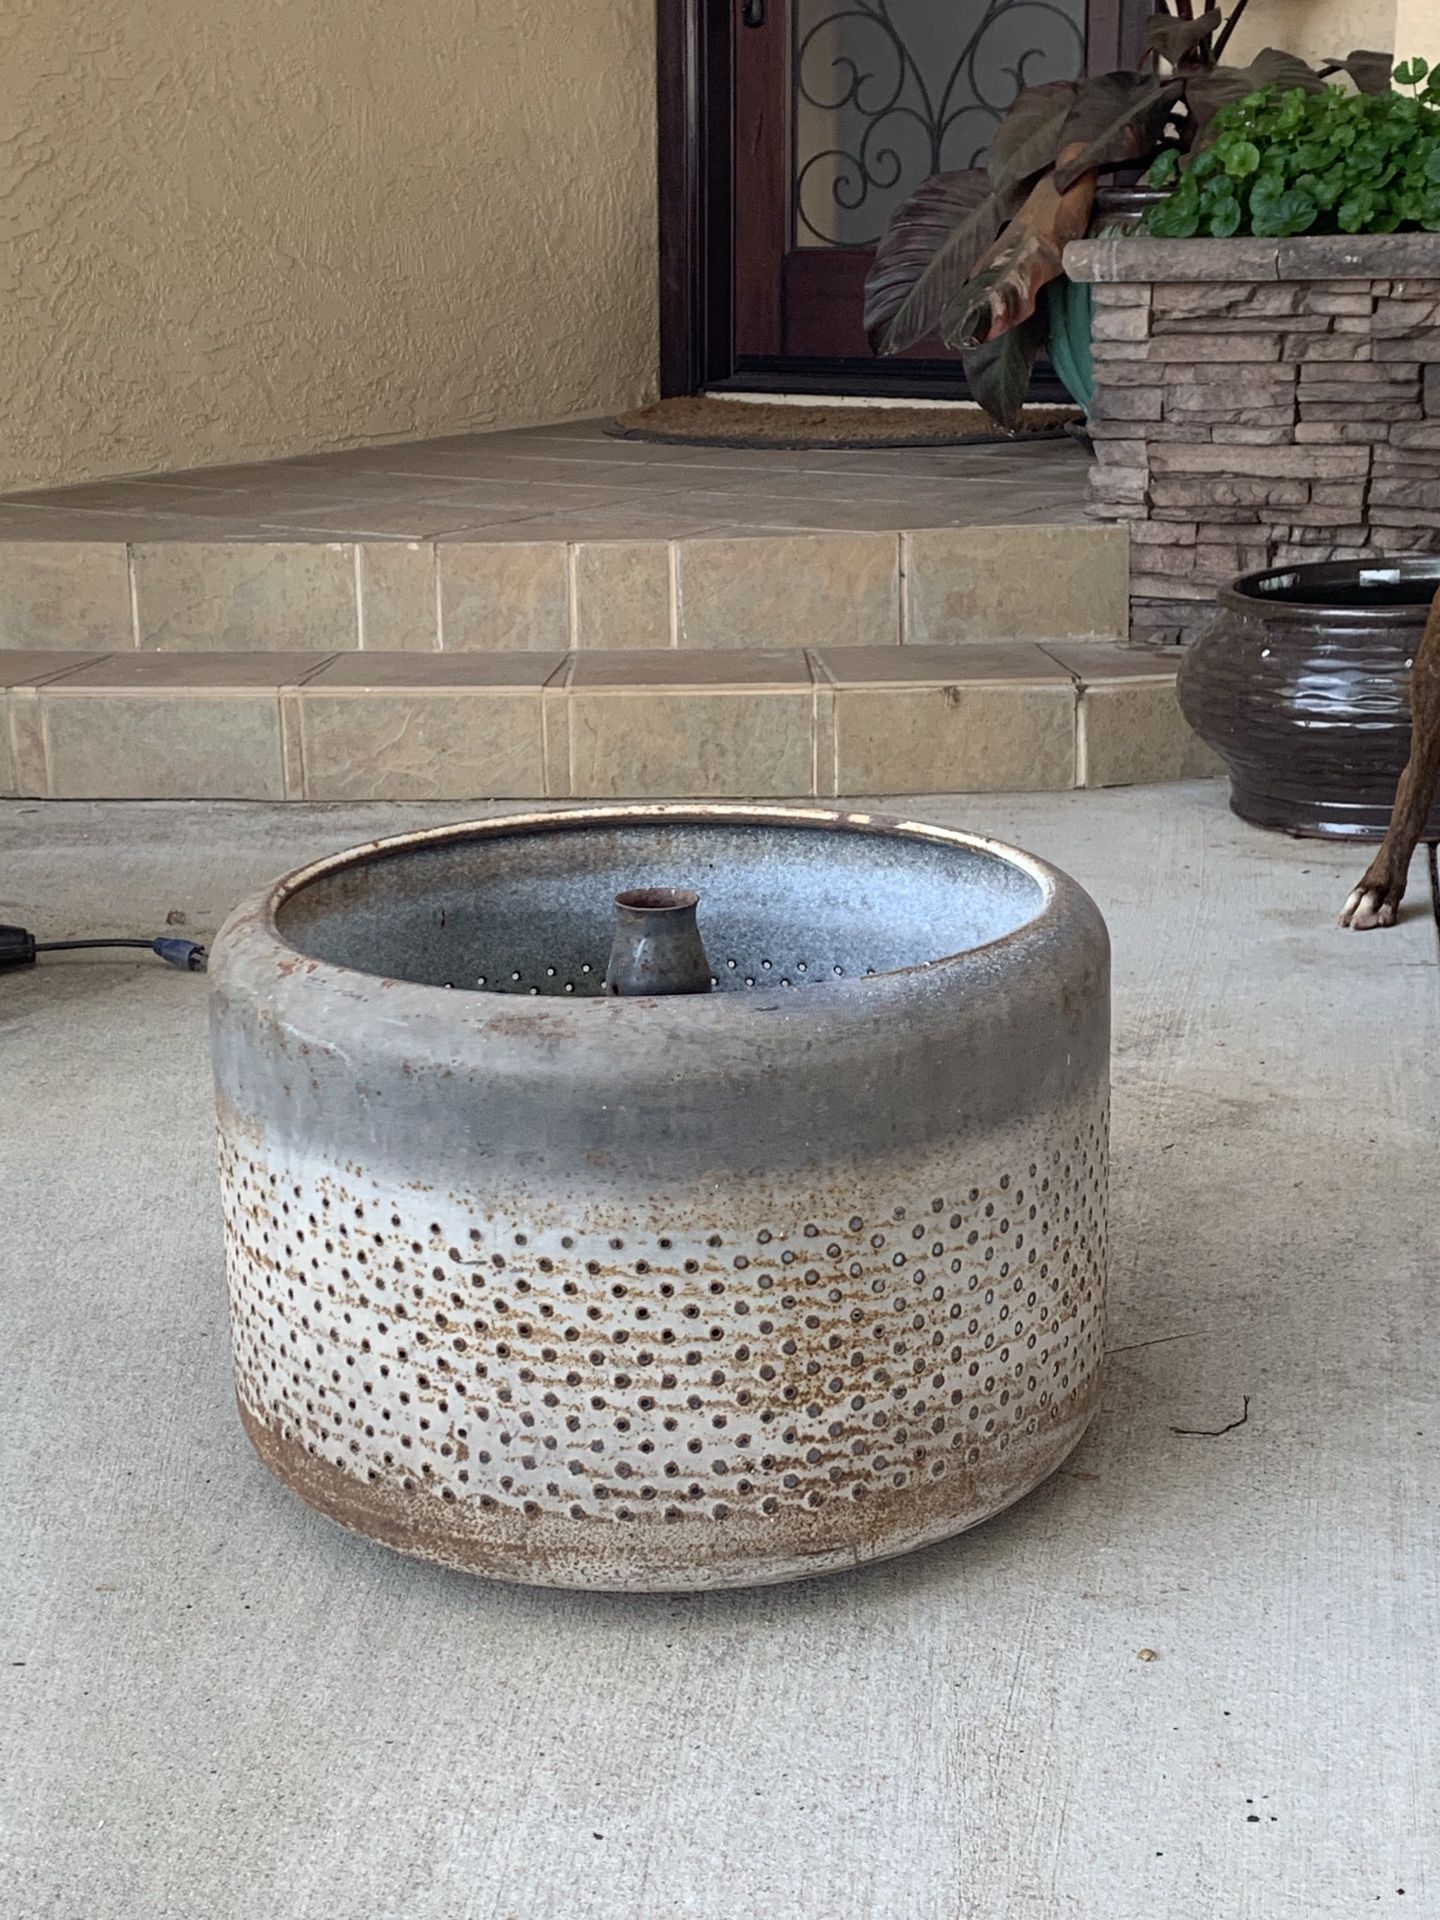 All you campers out there! $30 Washing machine drum fire pit 🔥